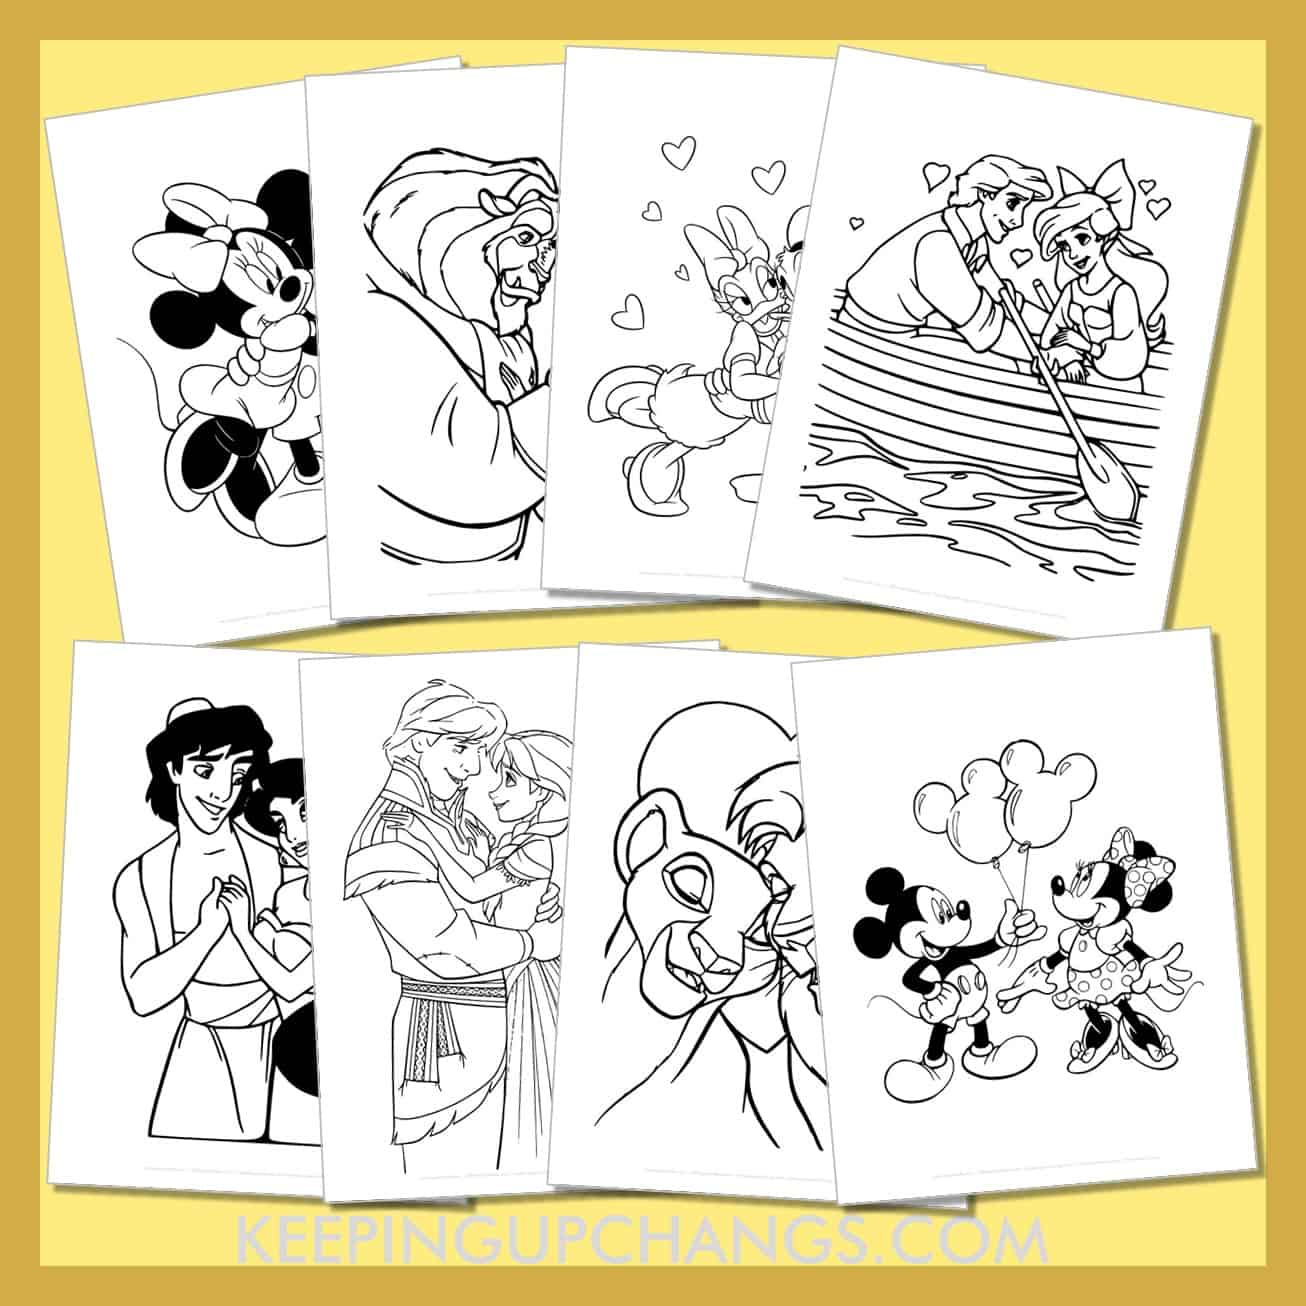 free disney valentine's day pictures to color for toddlers, kids, adults.